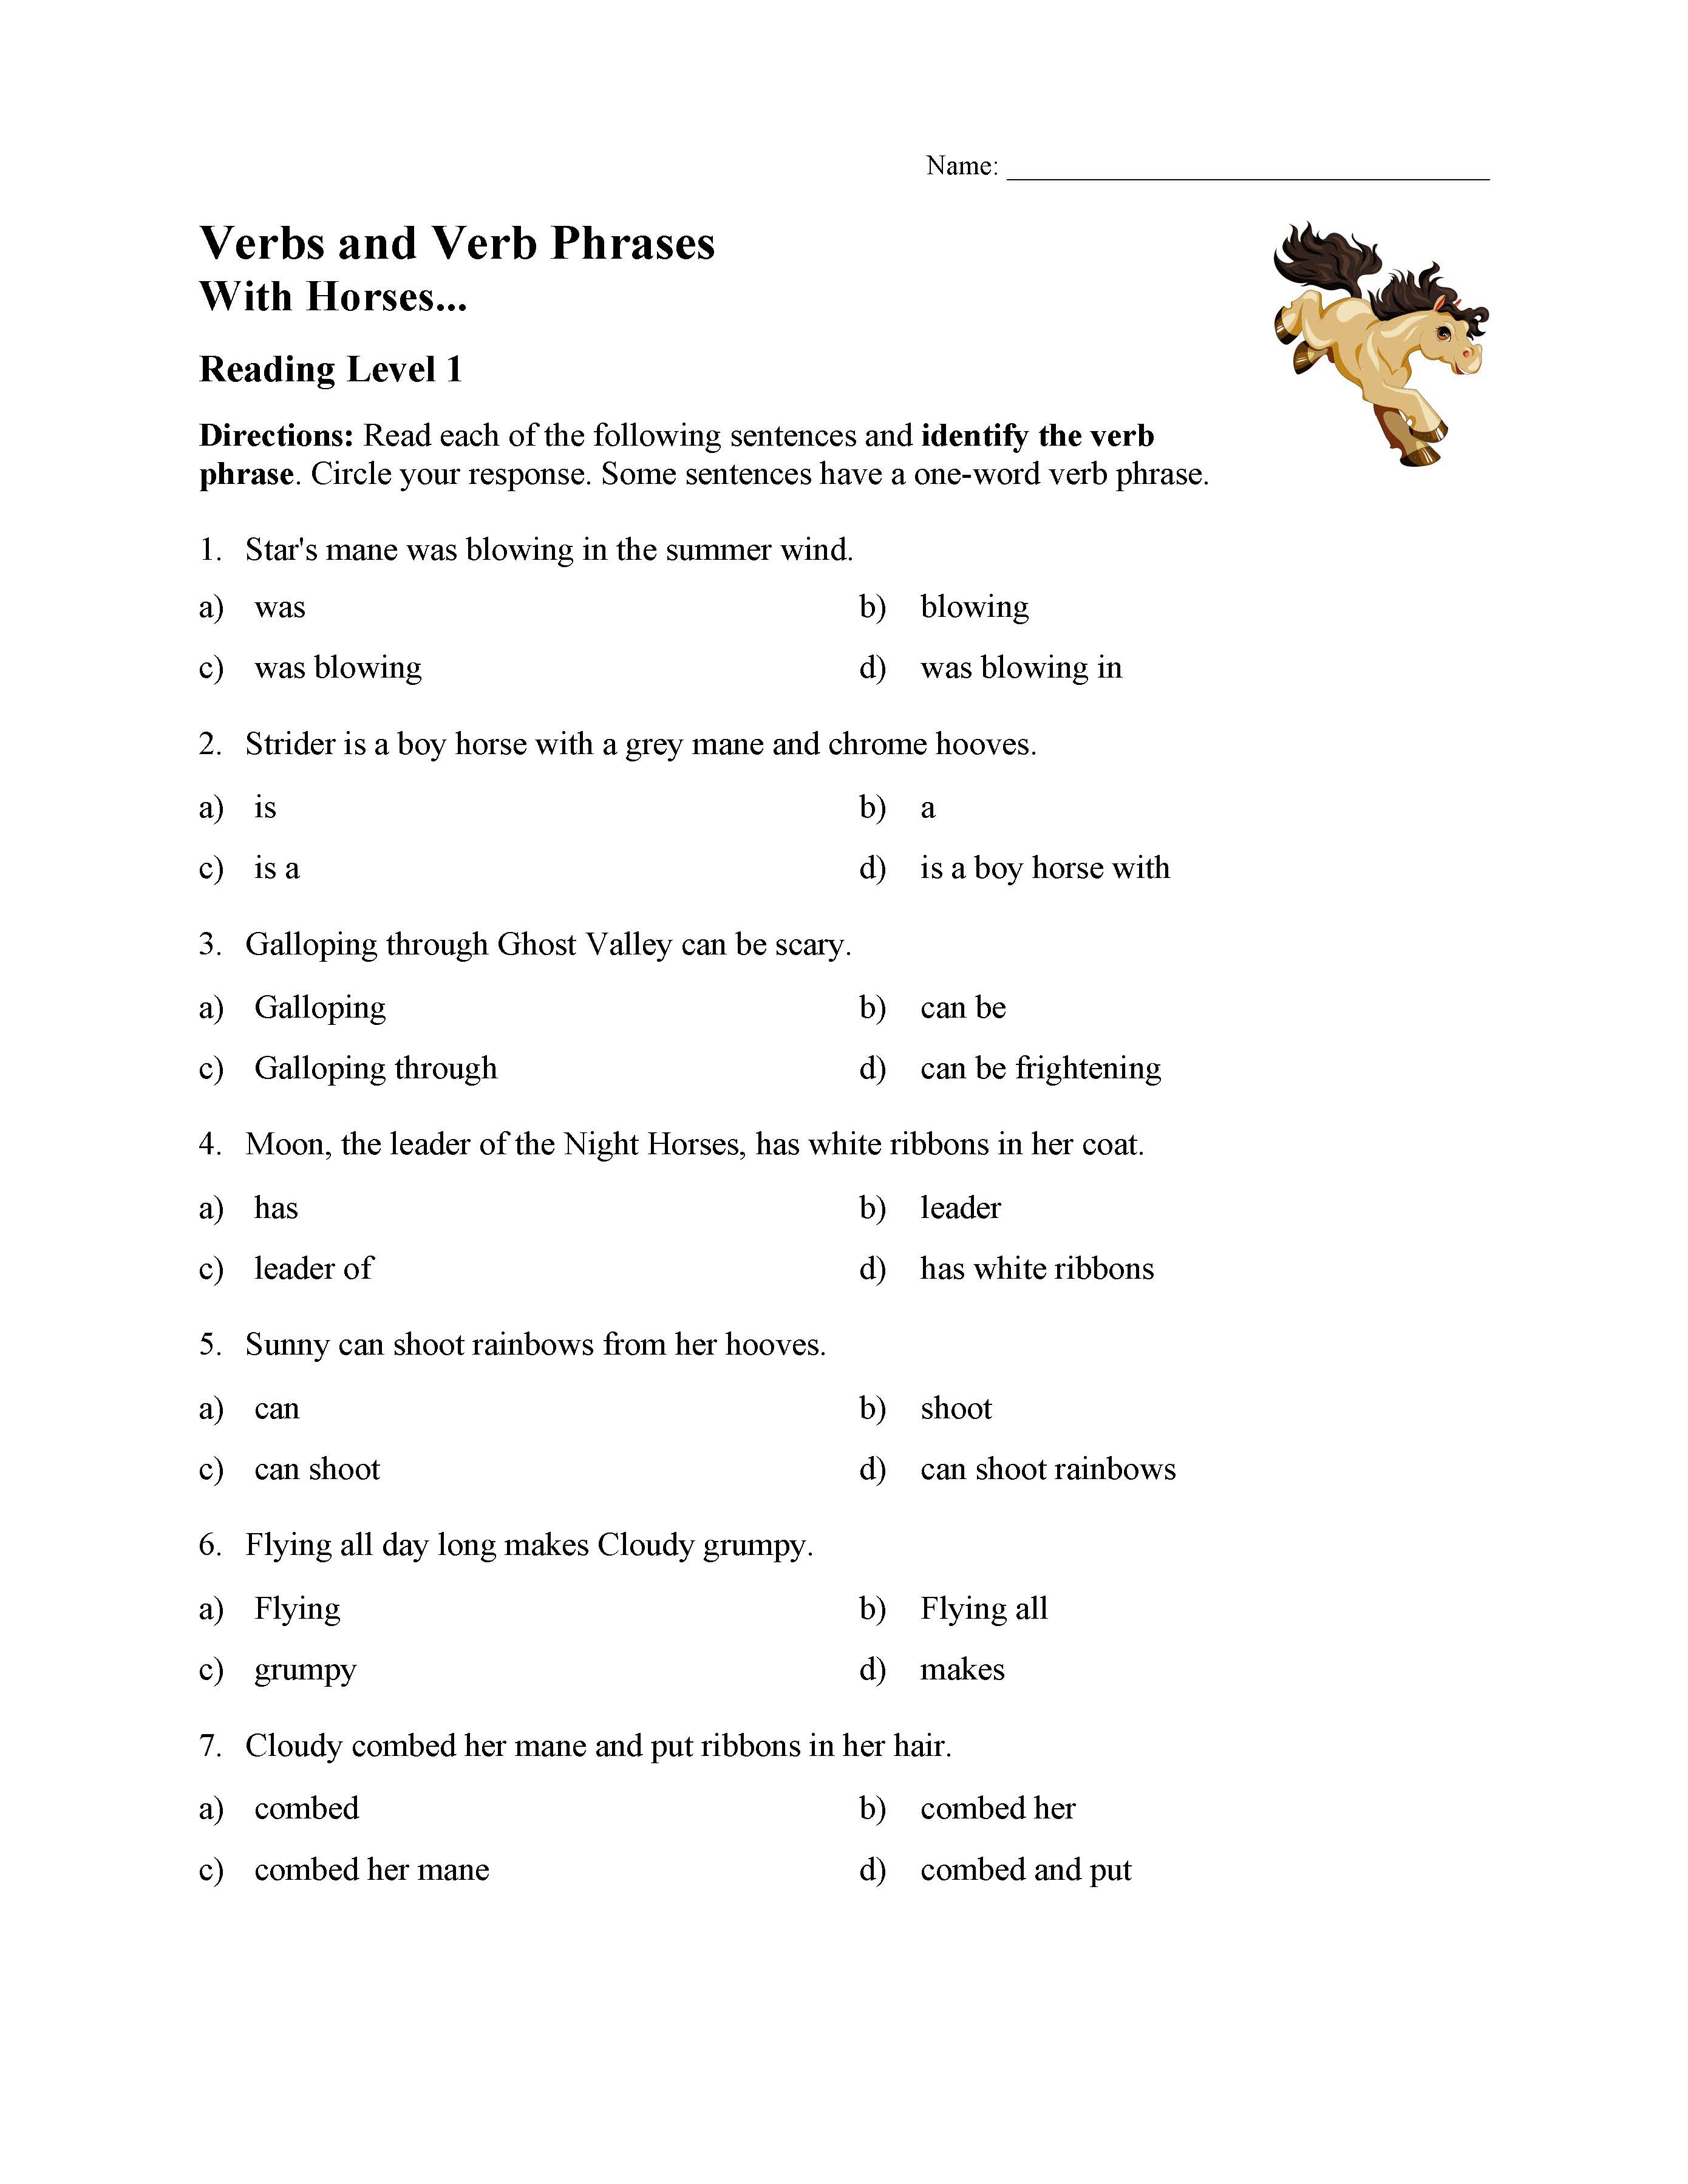 This is a preview image of the Verb Phrases Test - With Horses | Reading Level 1.